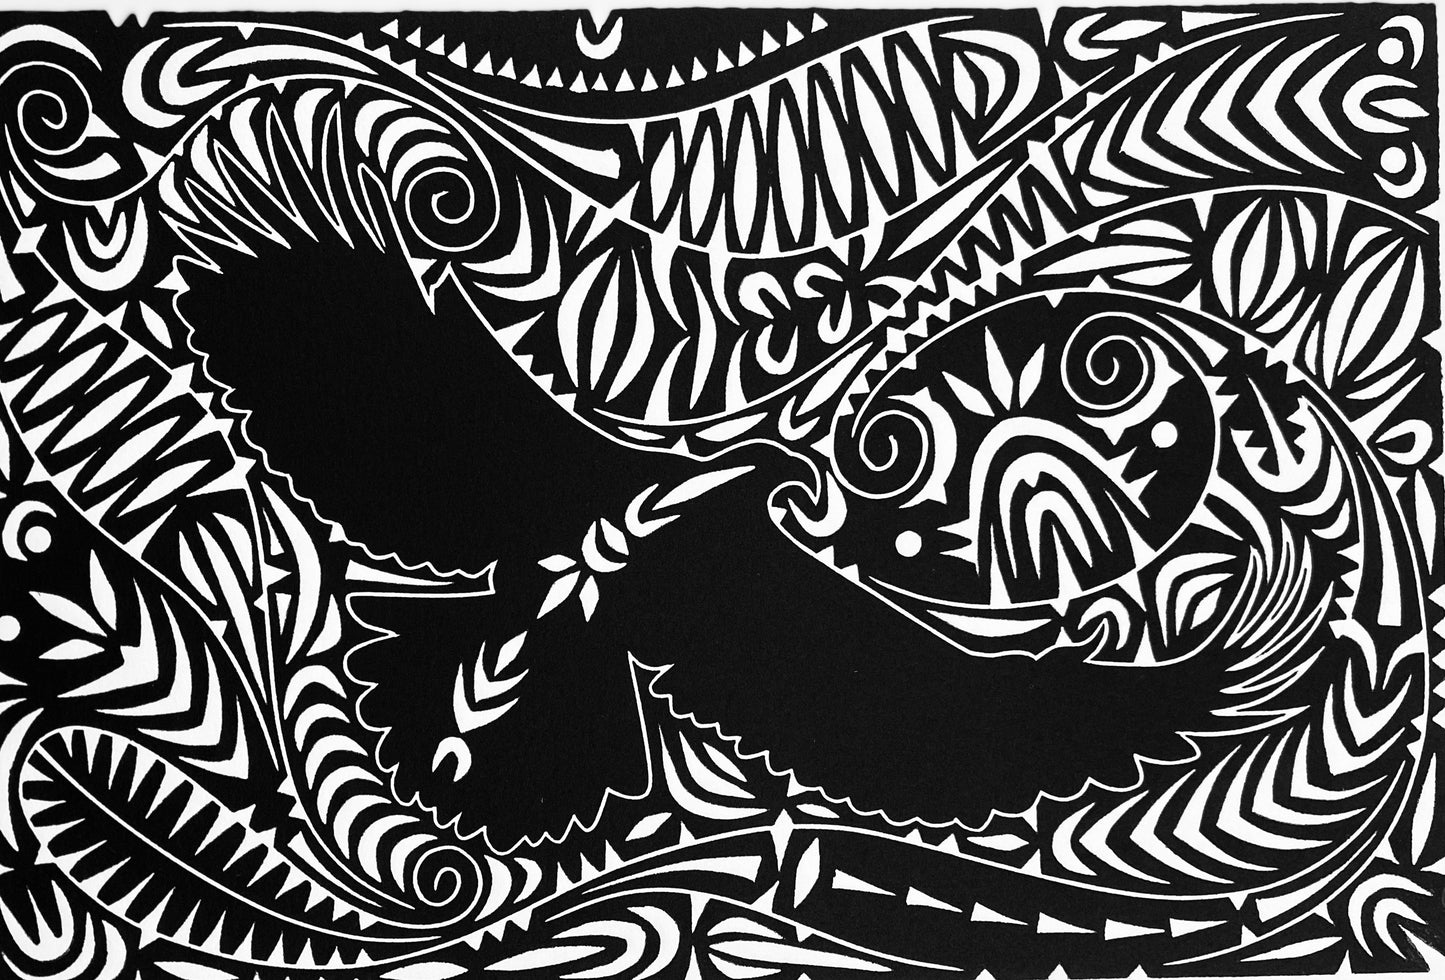 BRIAN ROBINSON | 'Soaring on the South-Easterly' | Linocut Print